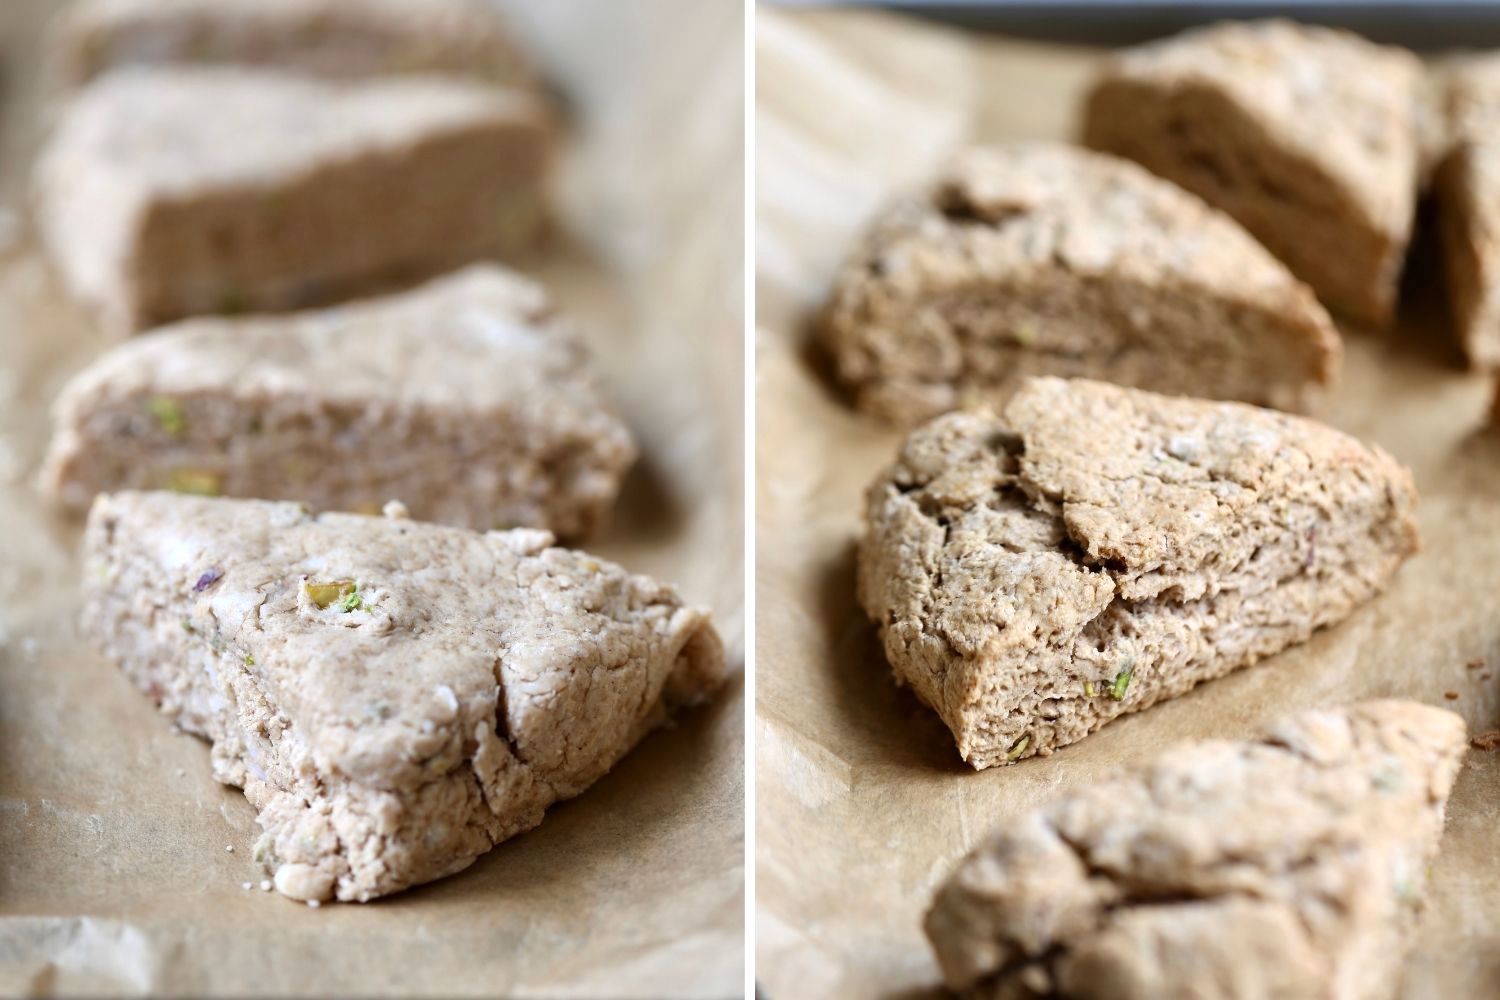 vegan cardamom scones before and after baking